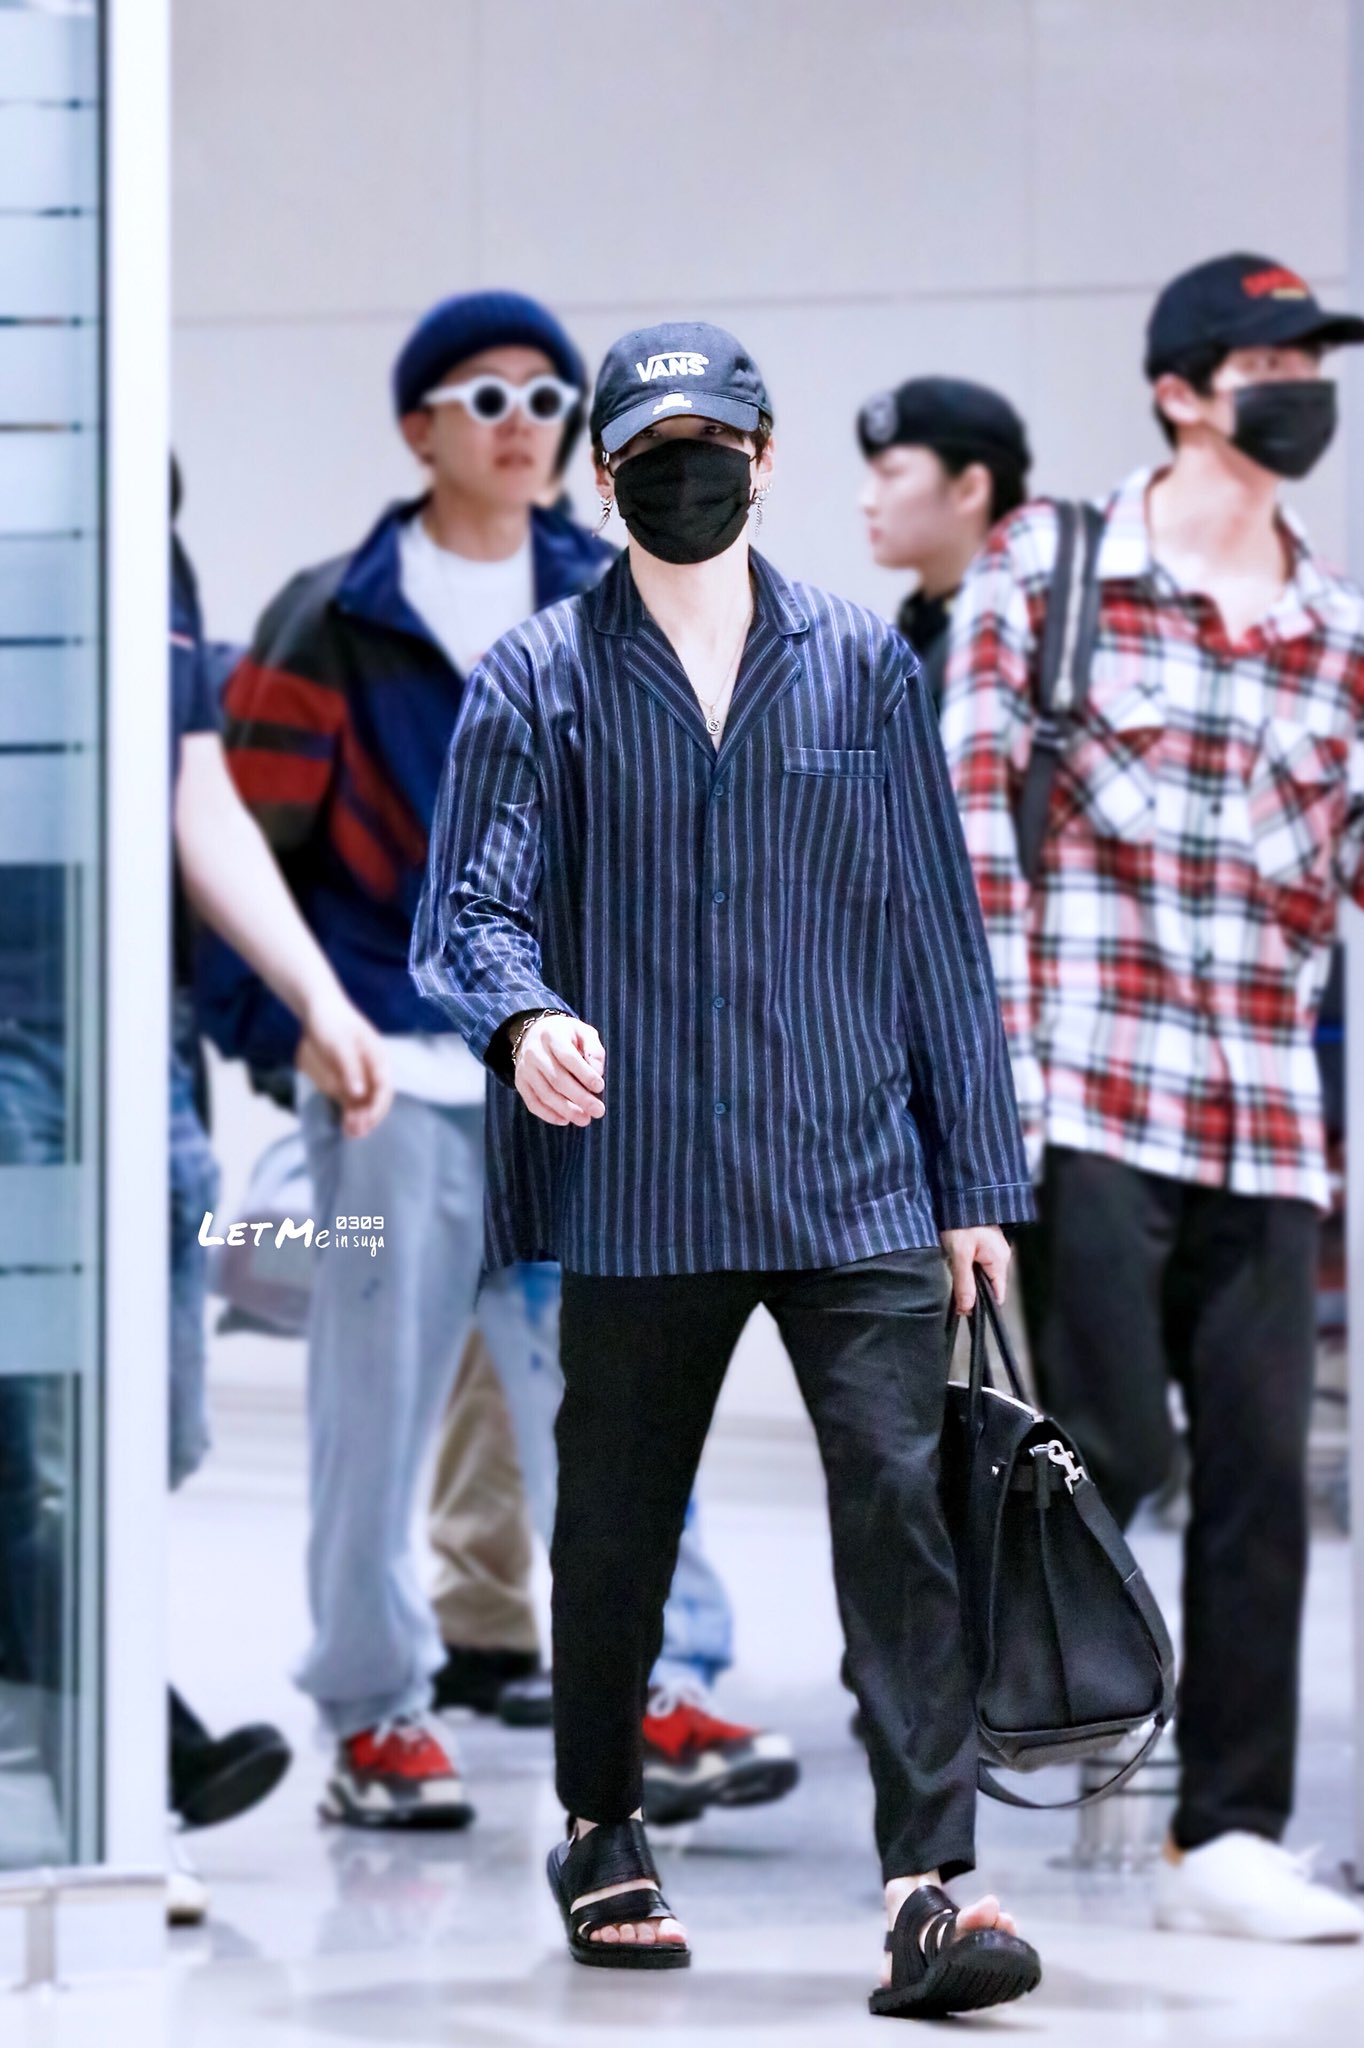 street style suga outfits